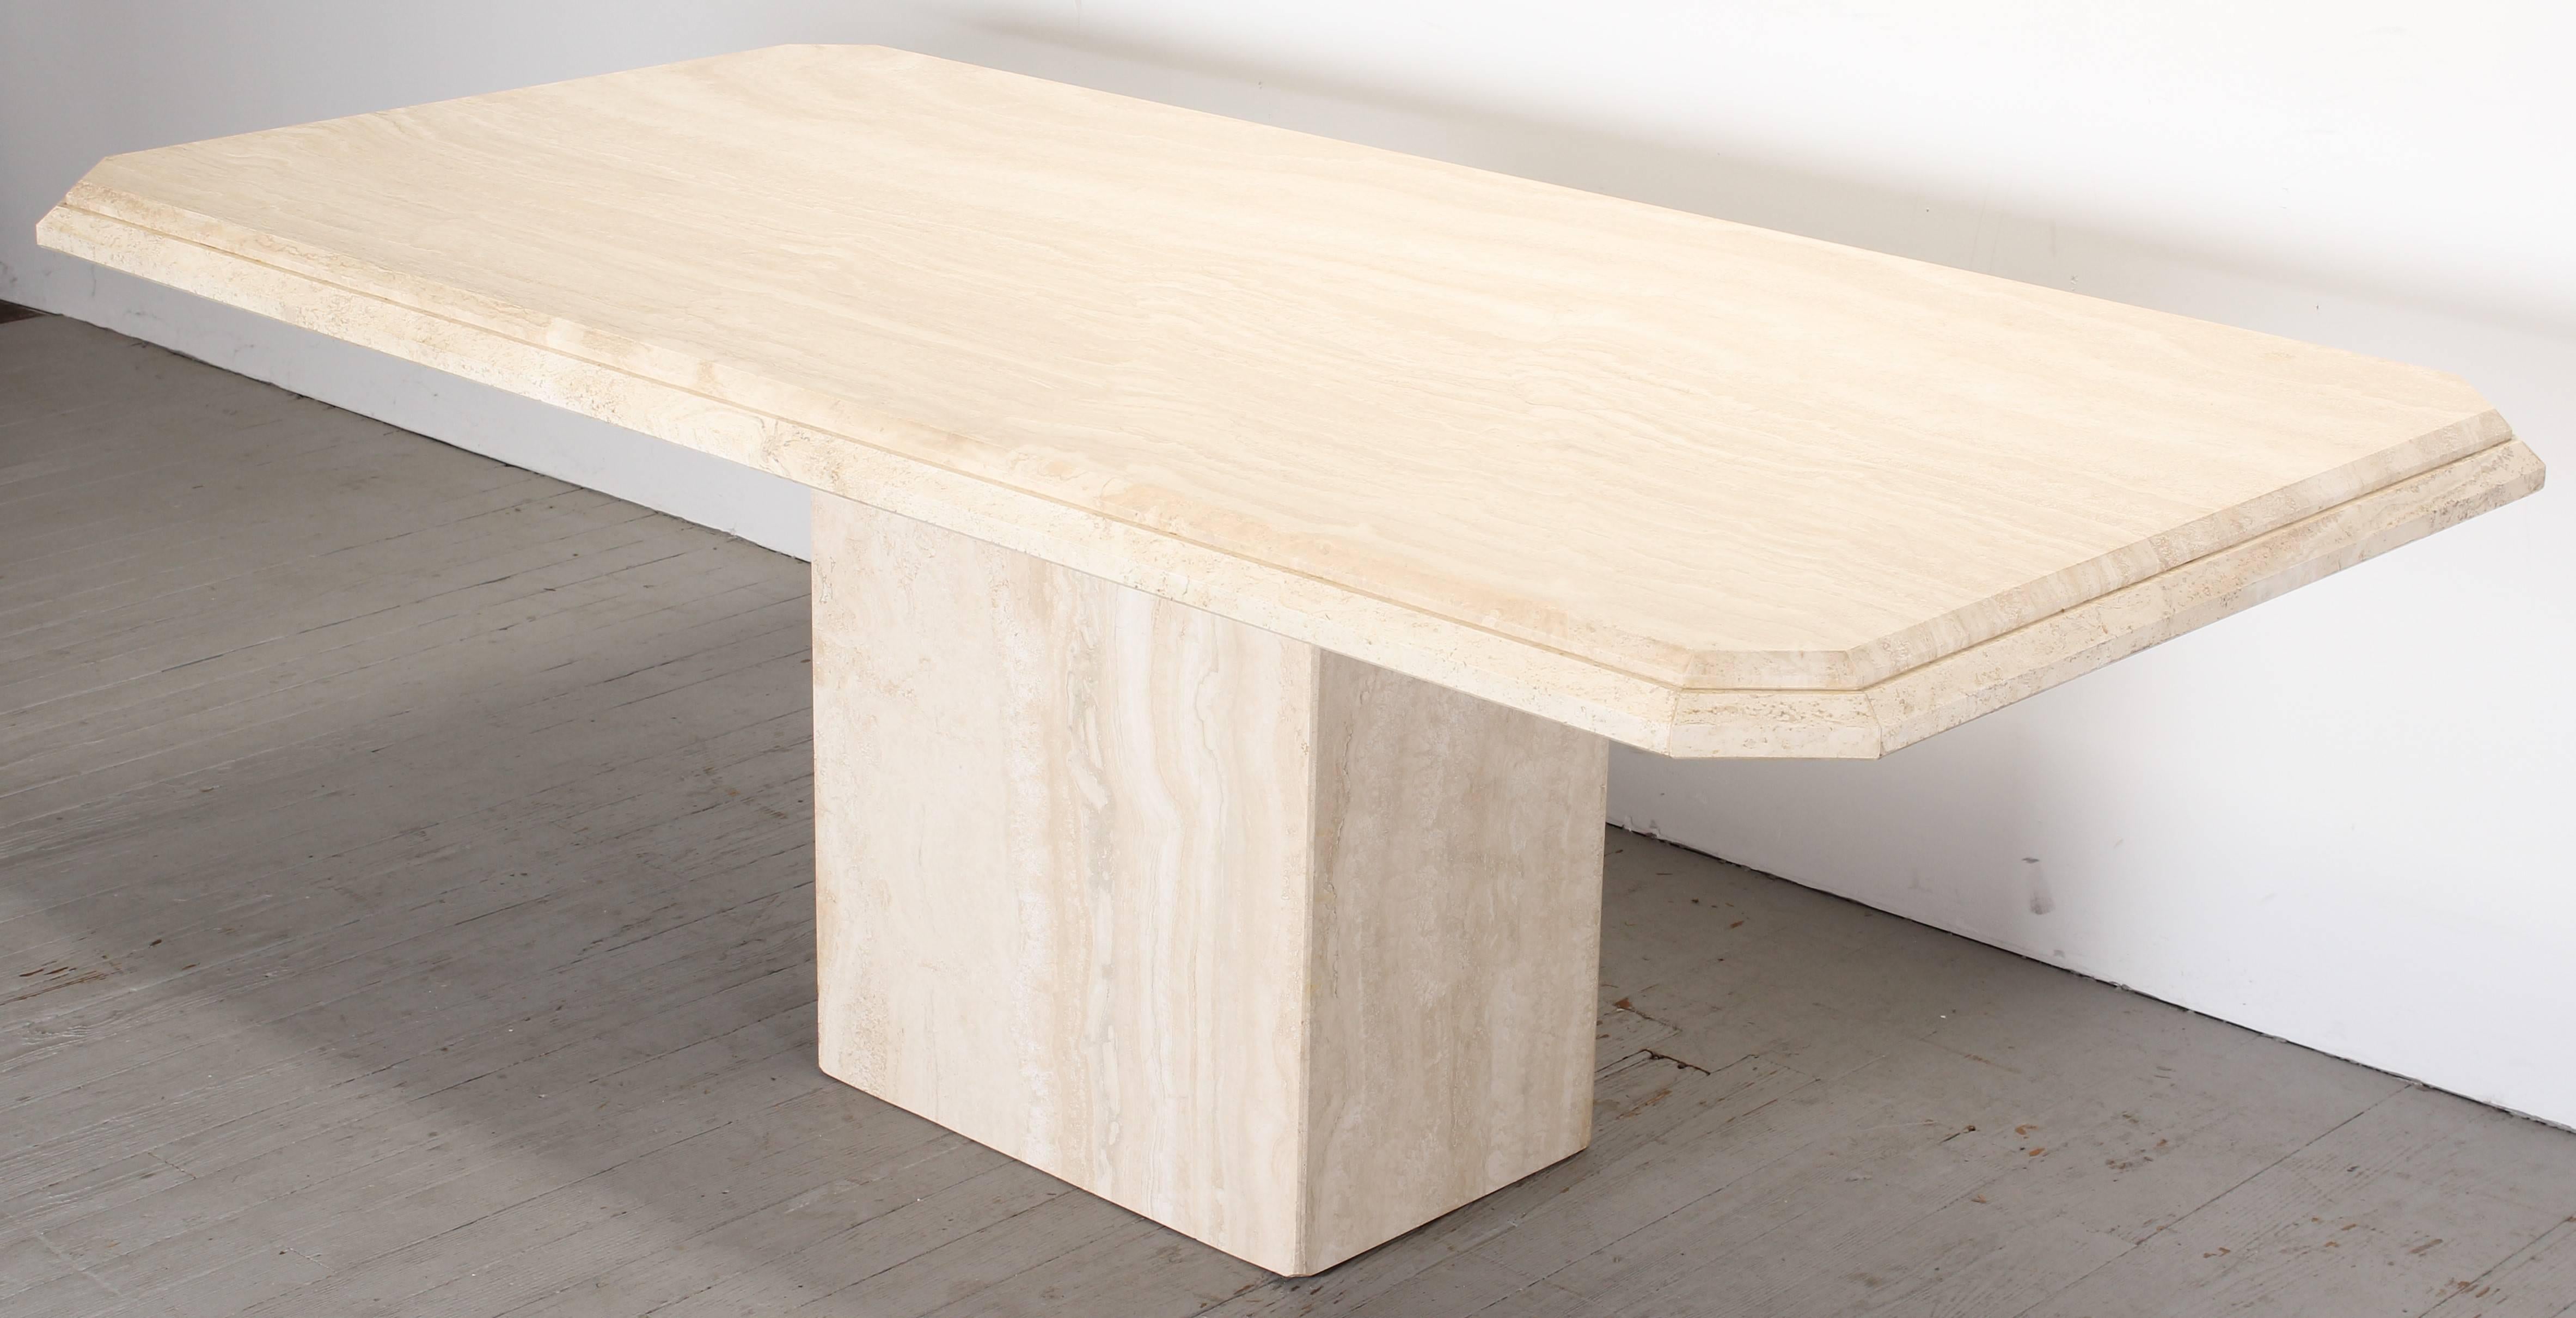 Travertine marble dining table in the style of Maurice Villency. The step edge rectangular dining table is in very good condition, age appropriate wear.